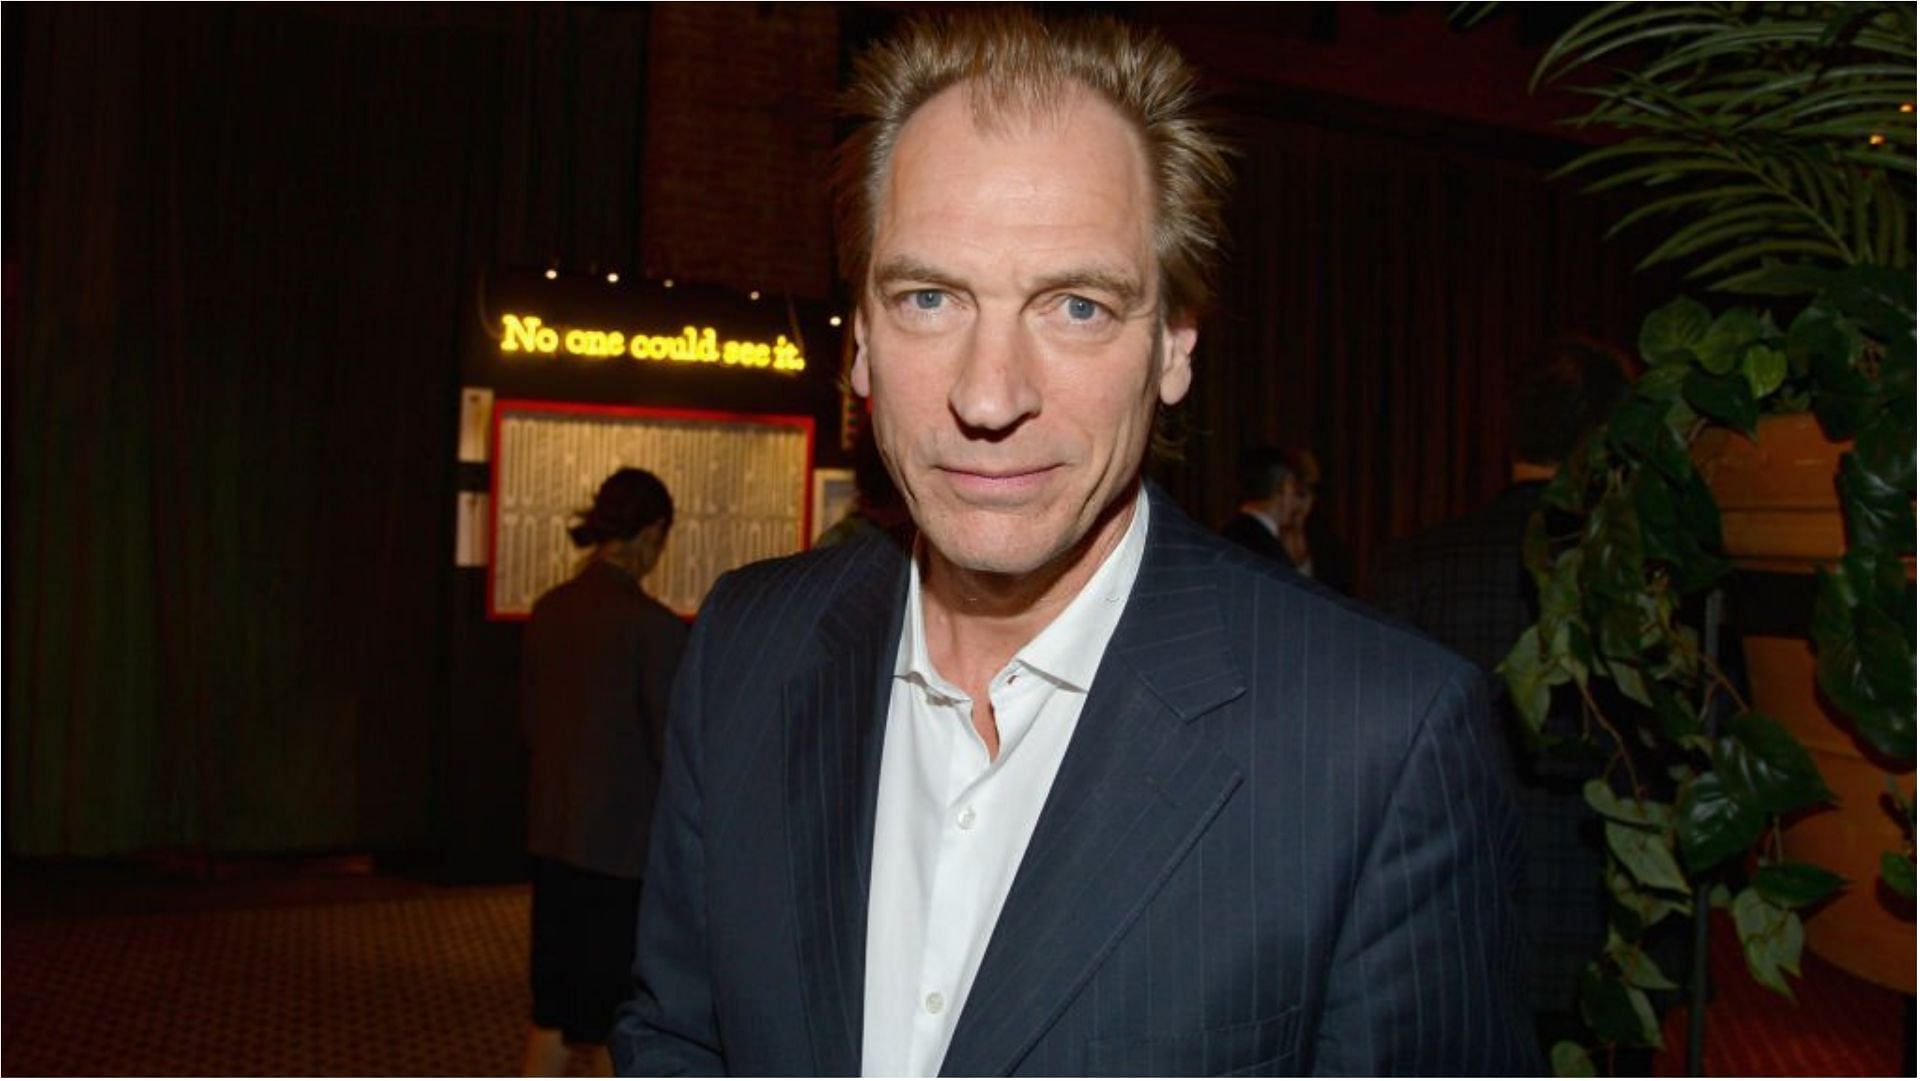 Julian Sands has been missing for around one month (Image via Patrick McMullan/Getty Images)